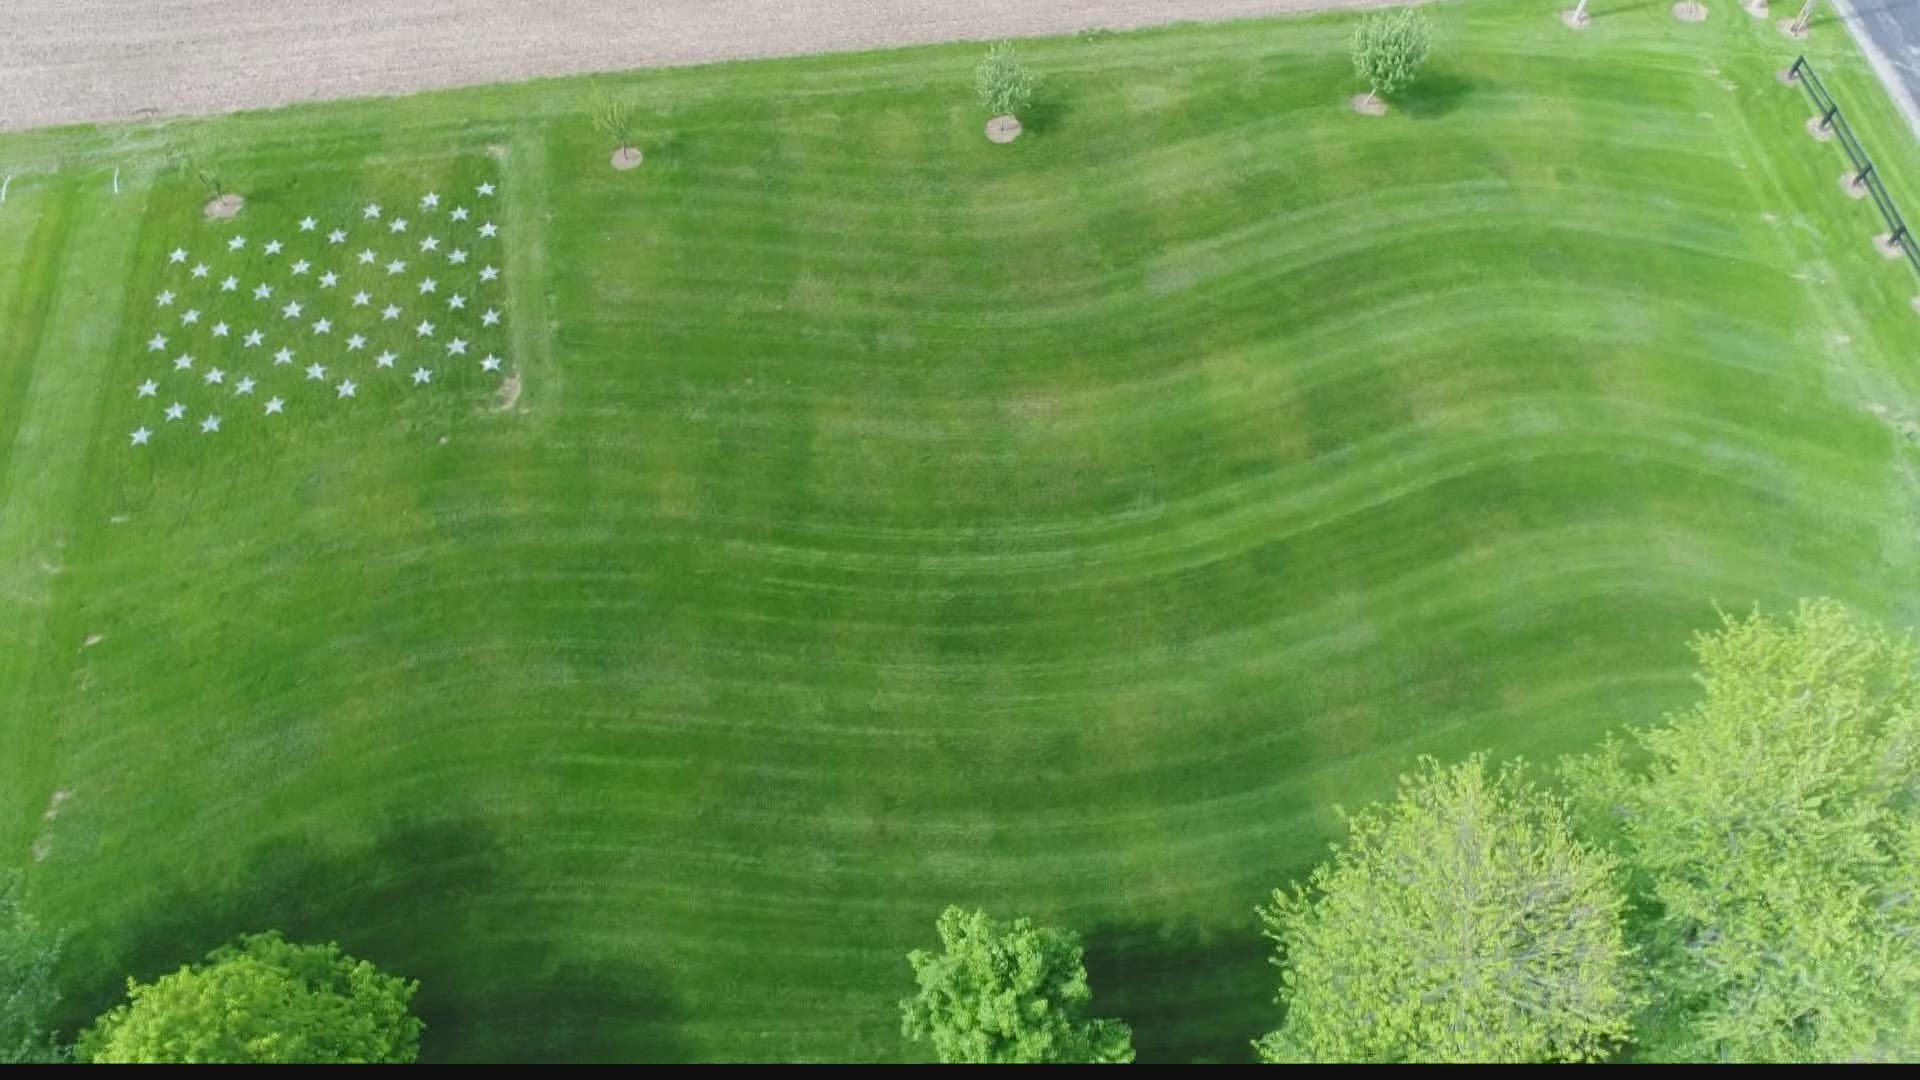 Rob Merchant created a giant flag in his front lawn to honor one his former middle school wrestlers, who was killed in Afghanistan in 2011.